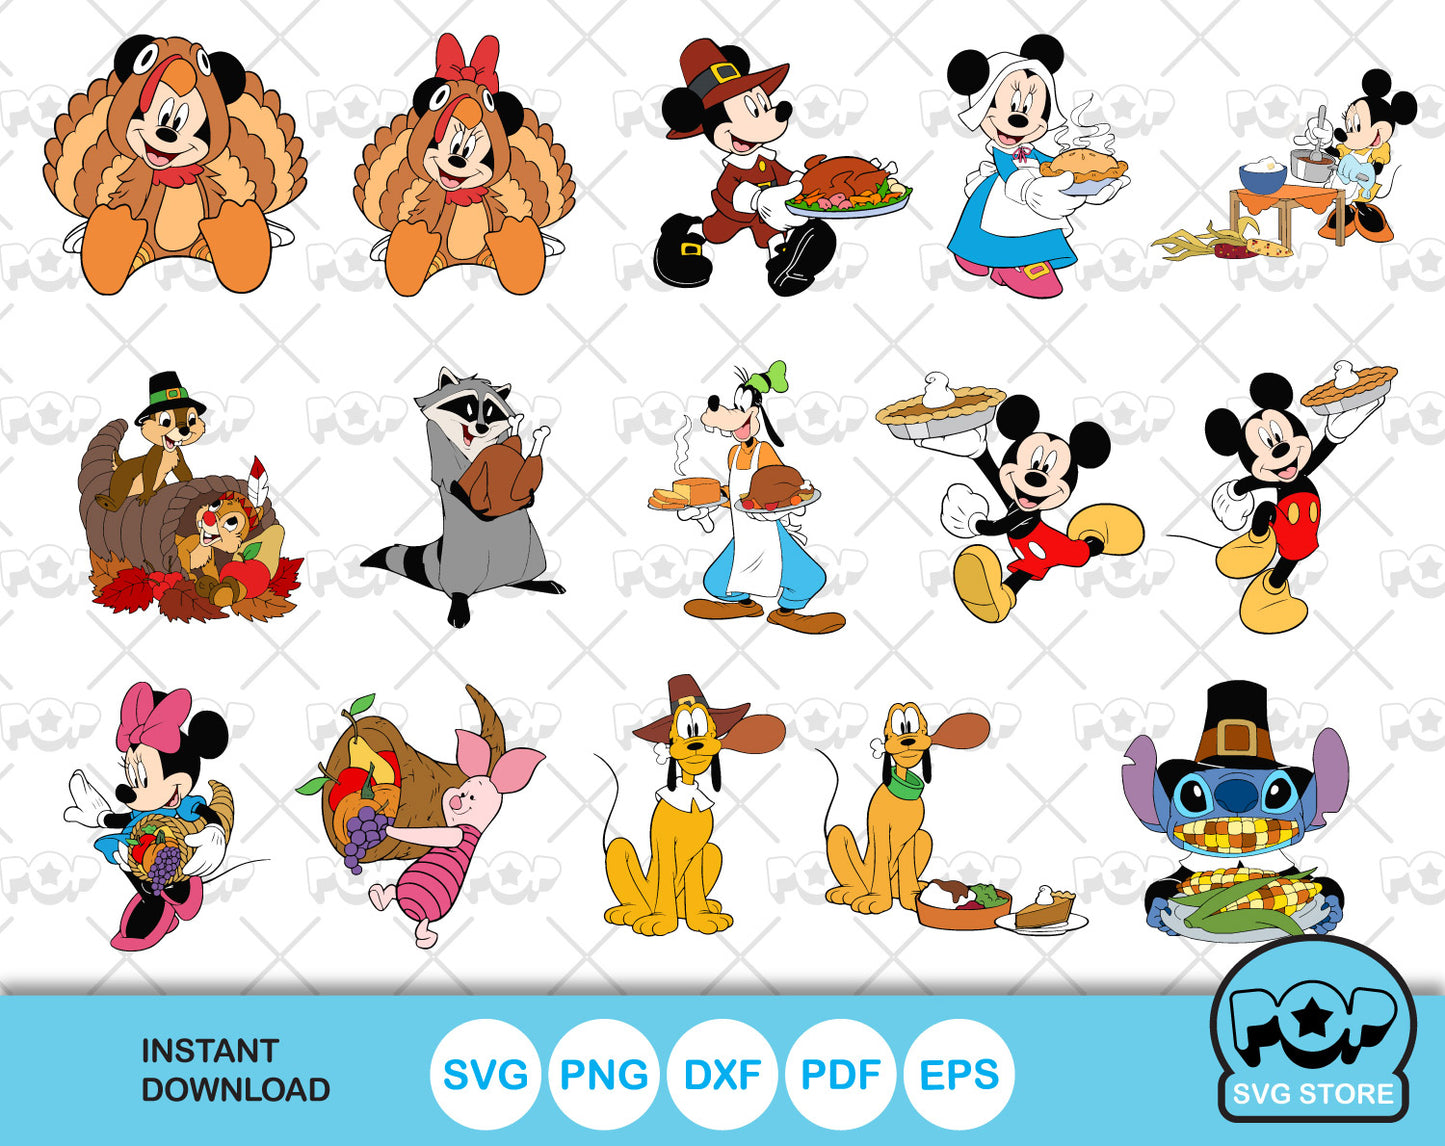 Disney Thanksgiving clipart bundle, Mickey Mouse Thanksgiving SVG cut files for Cricut / Silhouette, PNG, DXF, instant download